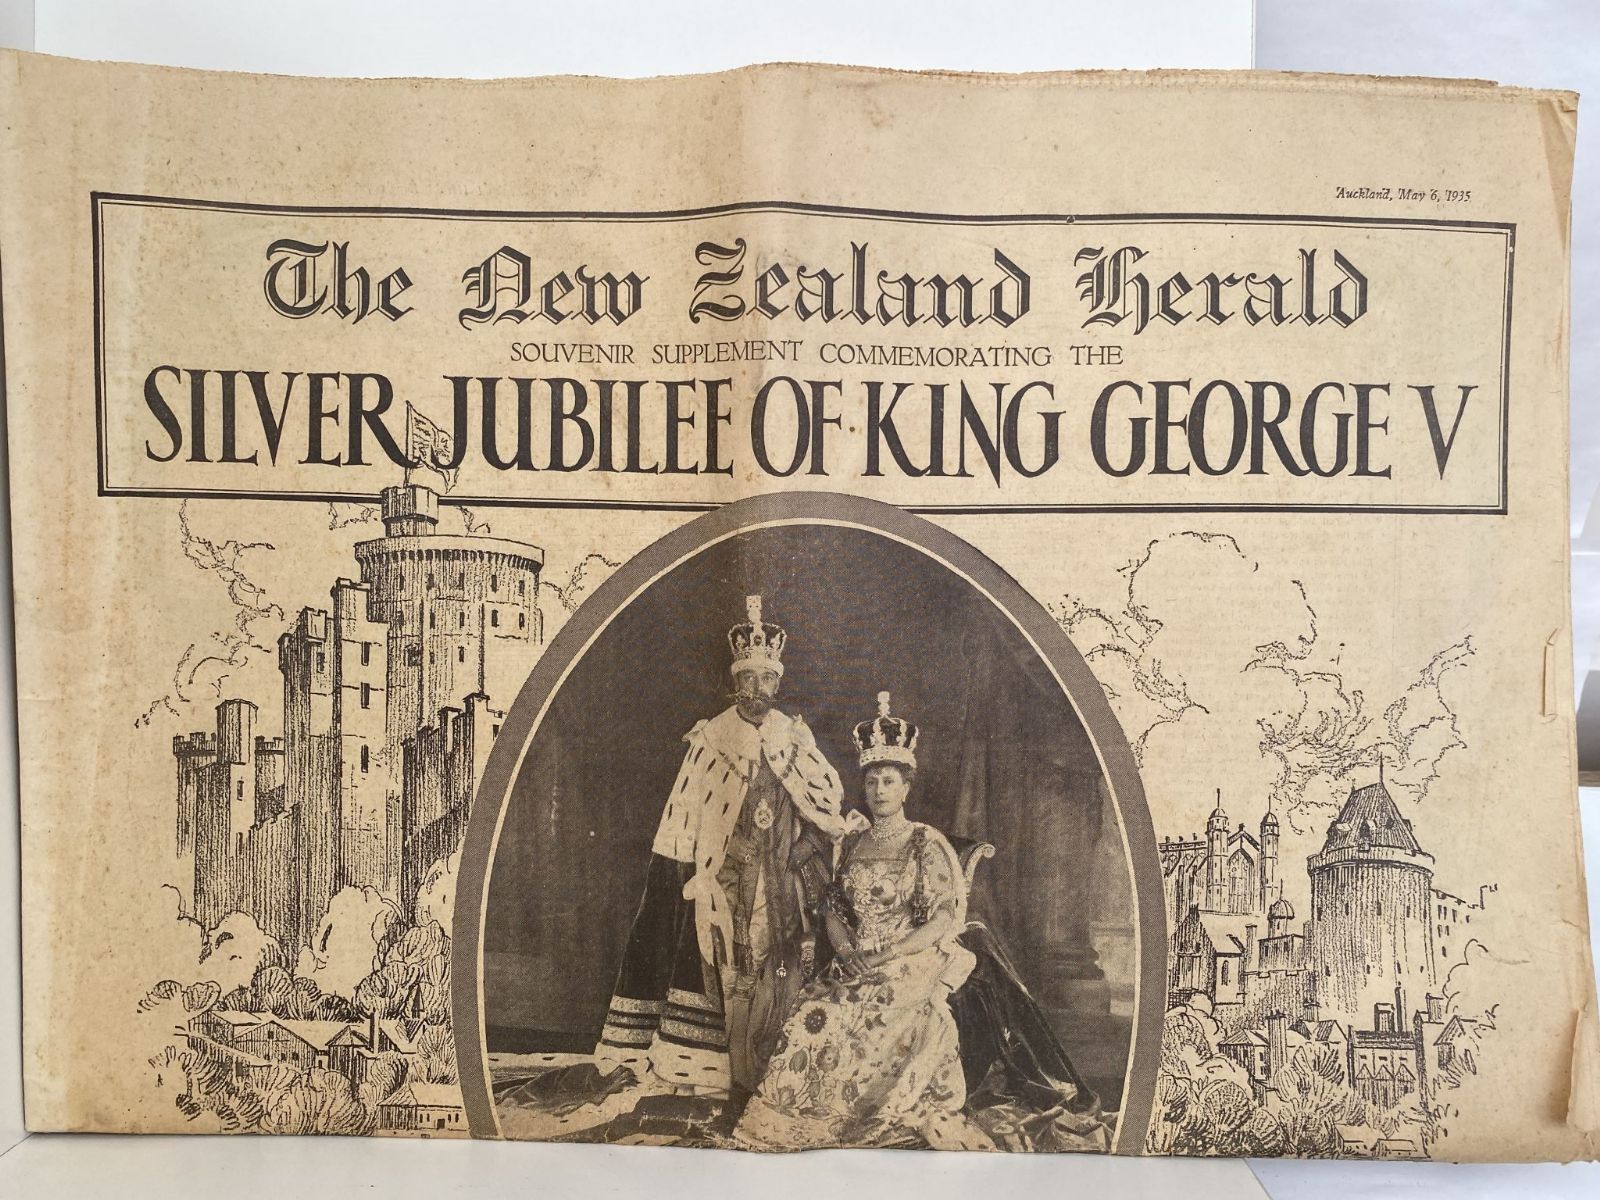 OLD NEWSPAPER: The New Zealand Herald - King George V Silver Jubilee 1935